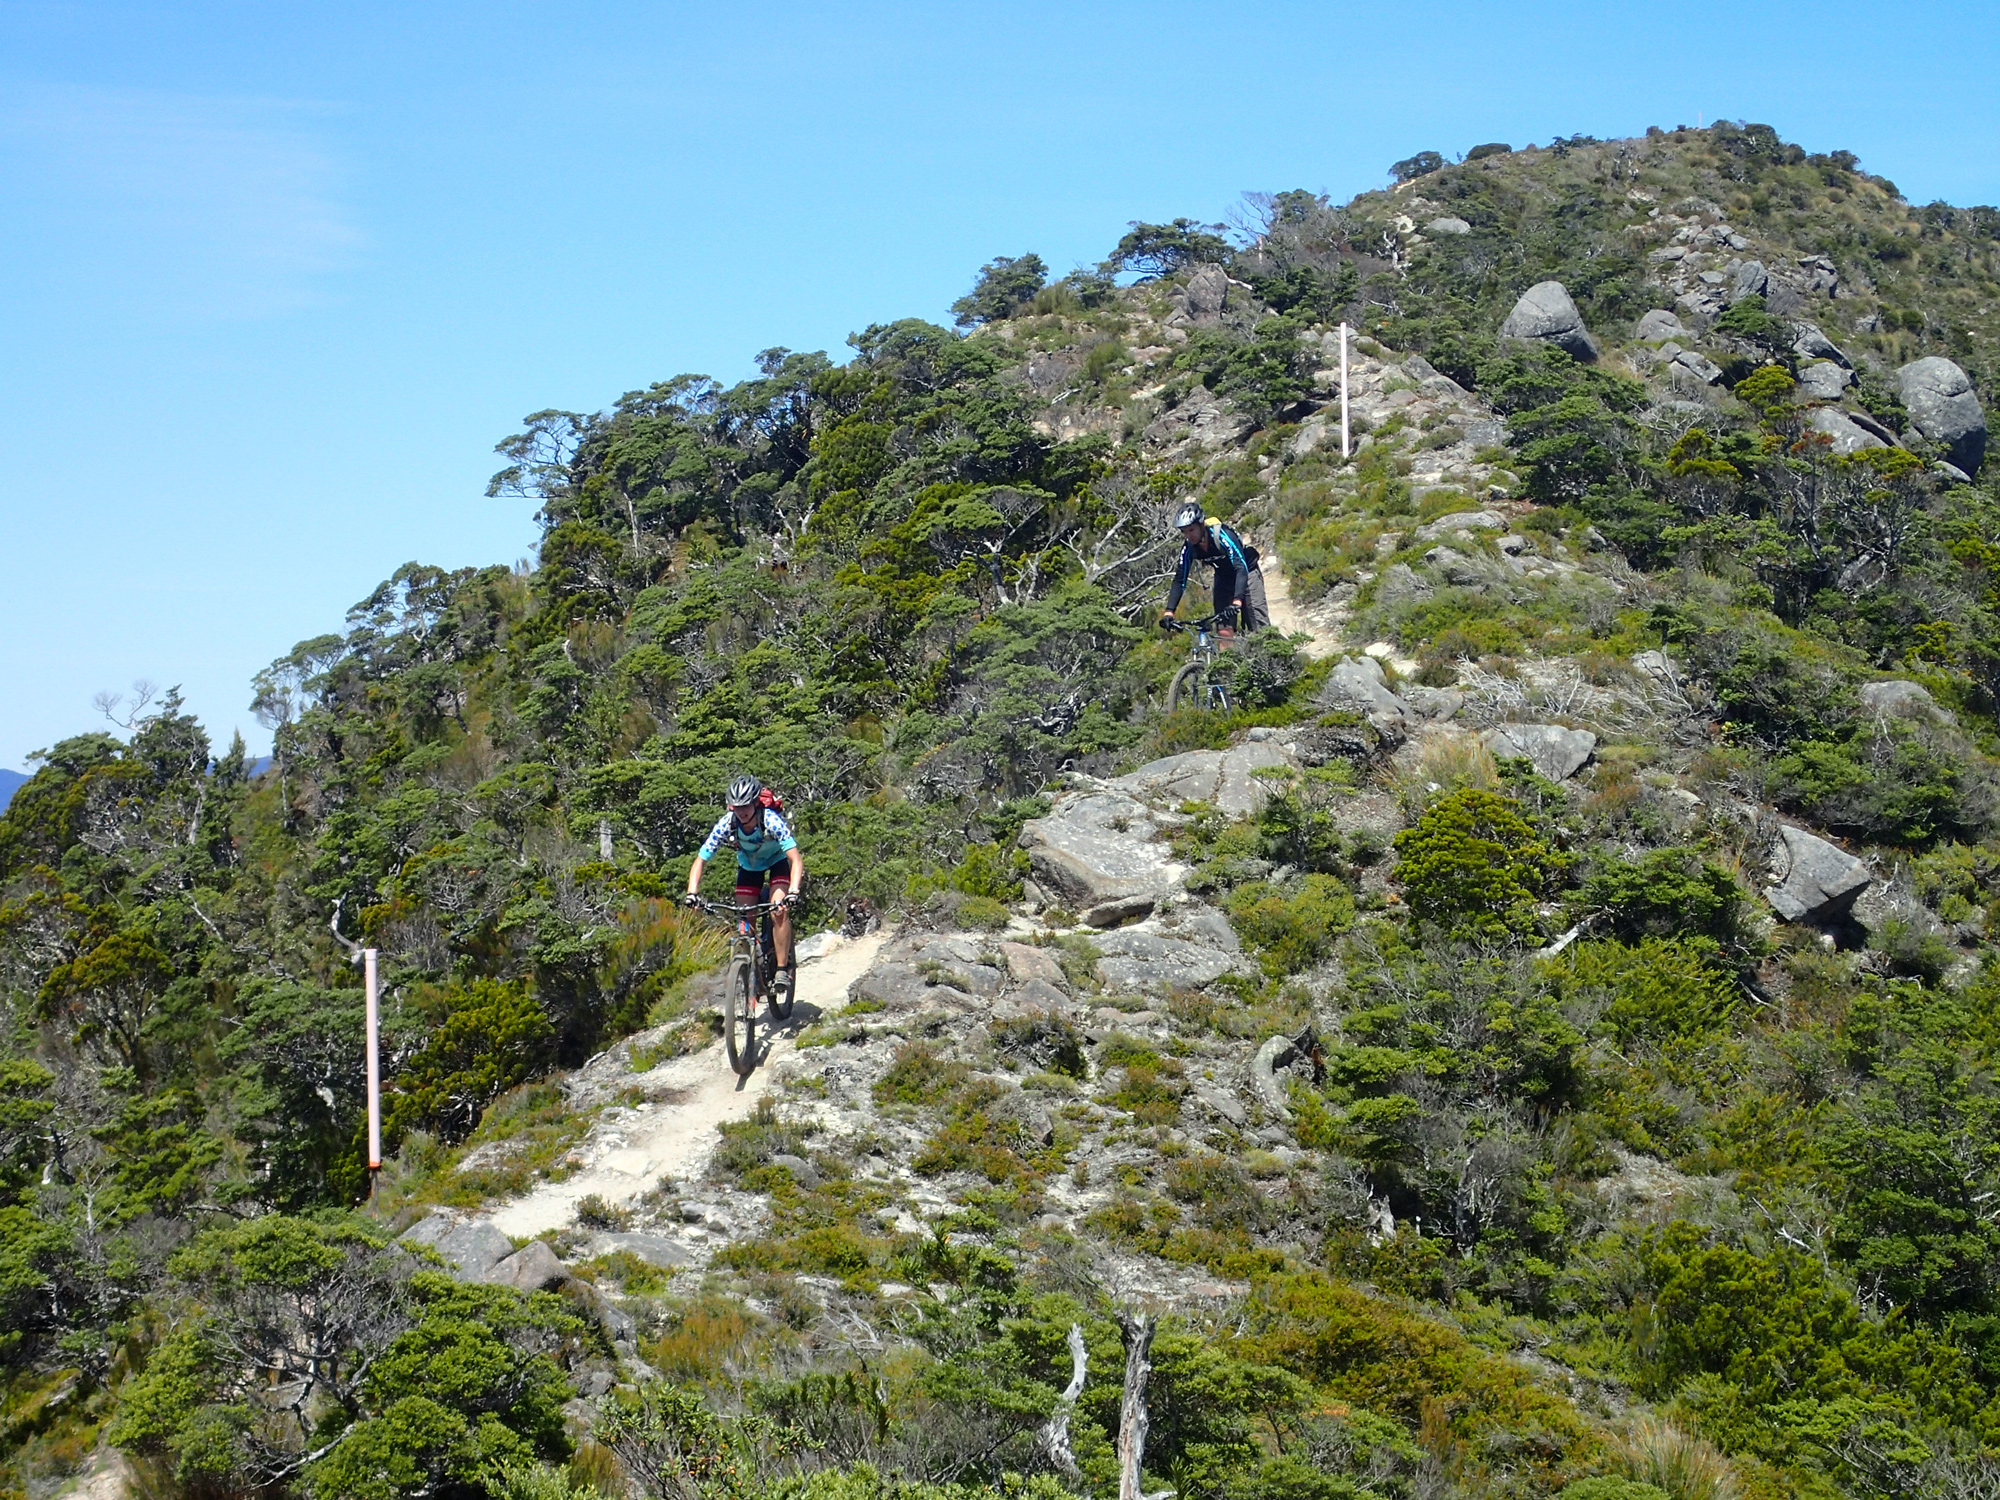 Descending the ridgeline, perfect day for it